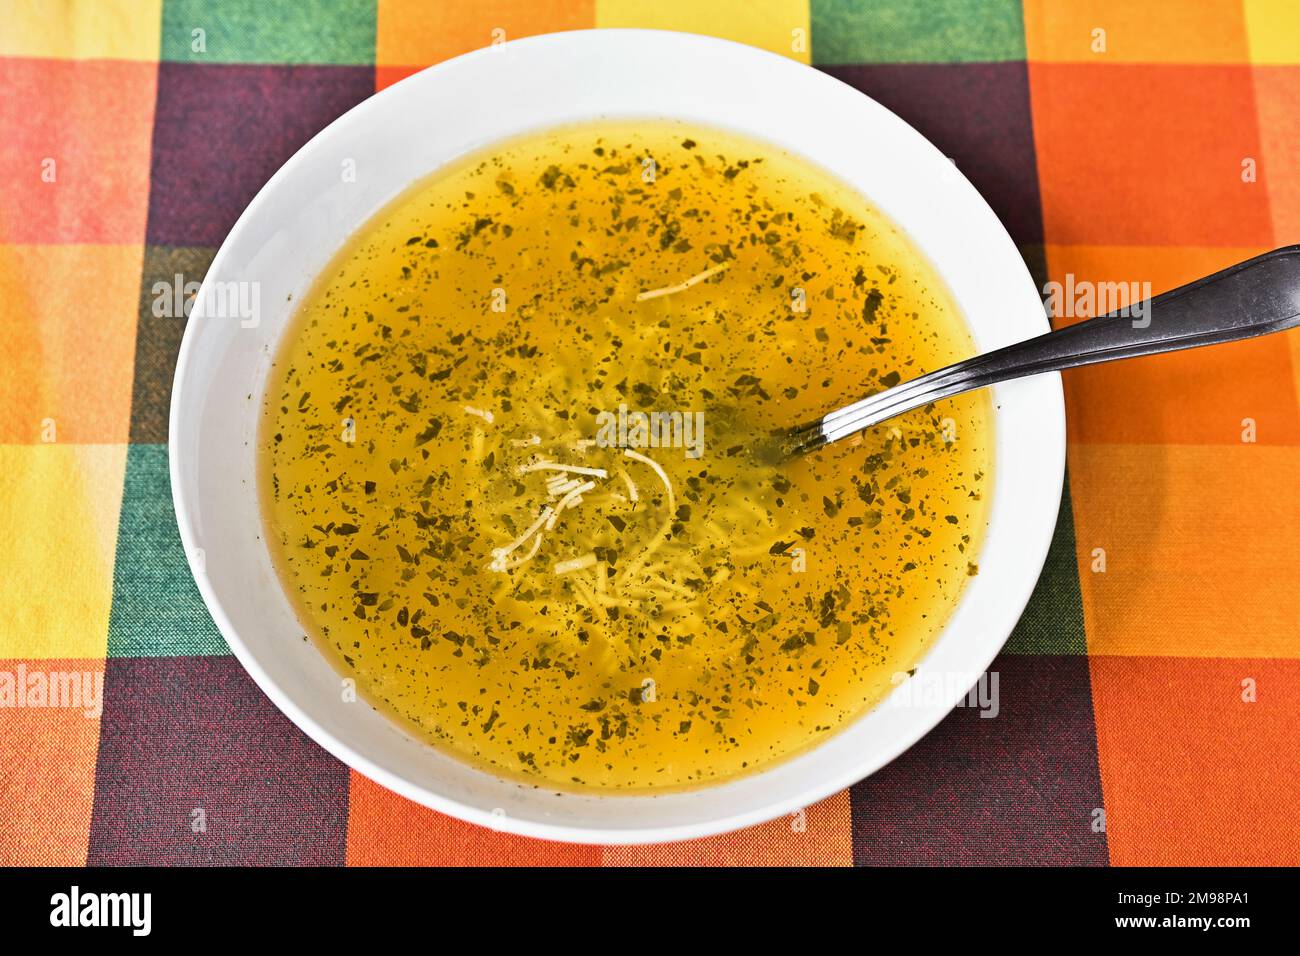 Noodle soup with herb in white plate on orange tablecloth, closeup. Stock Photo